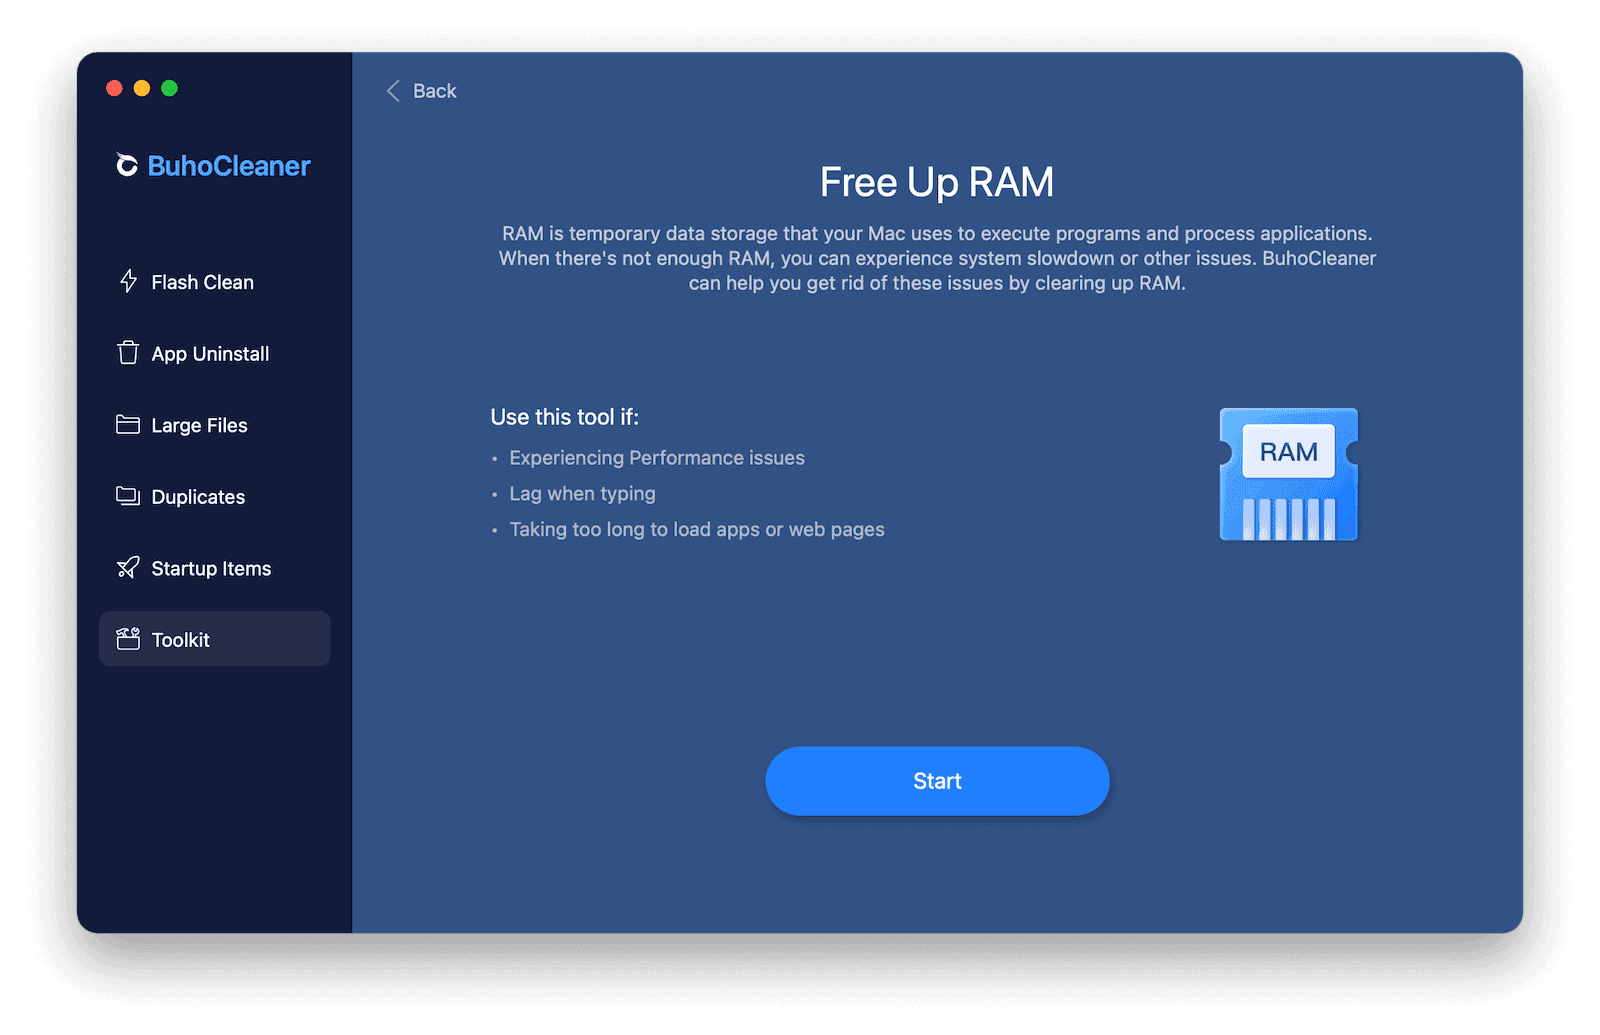 Free Up RAM on Mac with BuhoCleaner